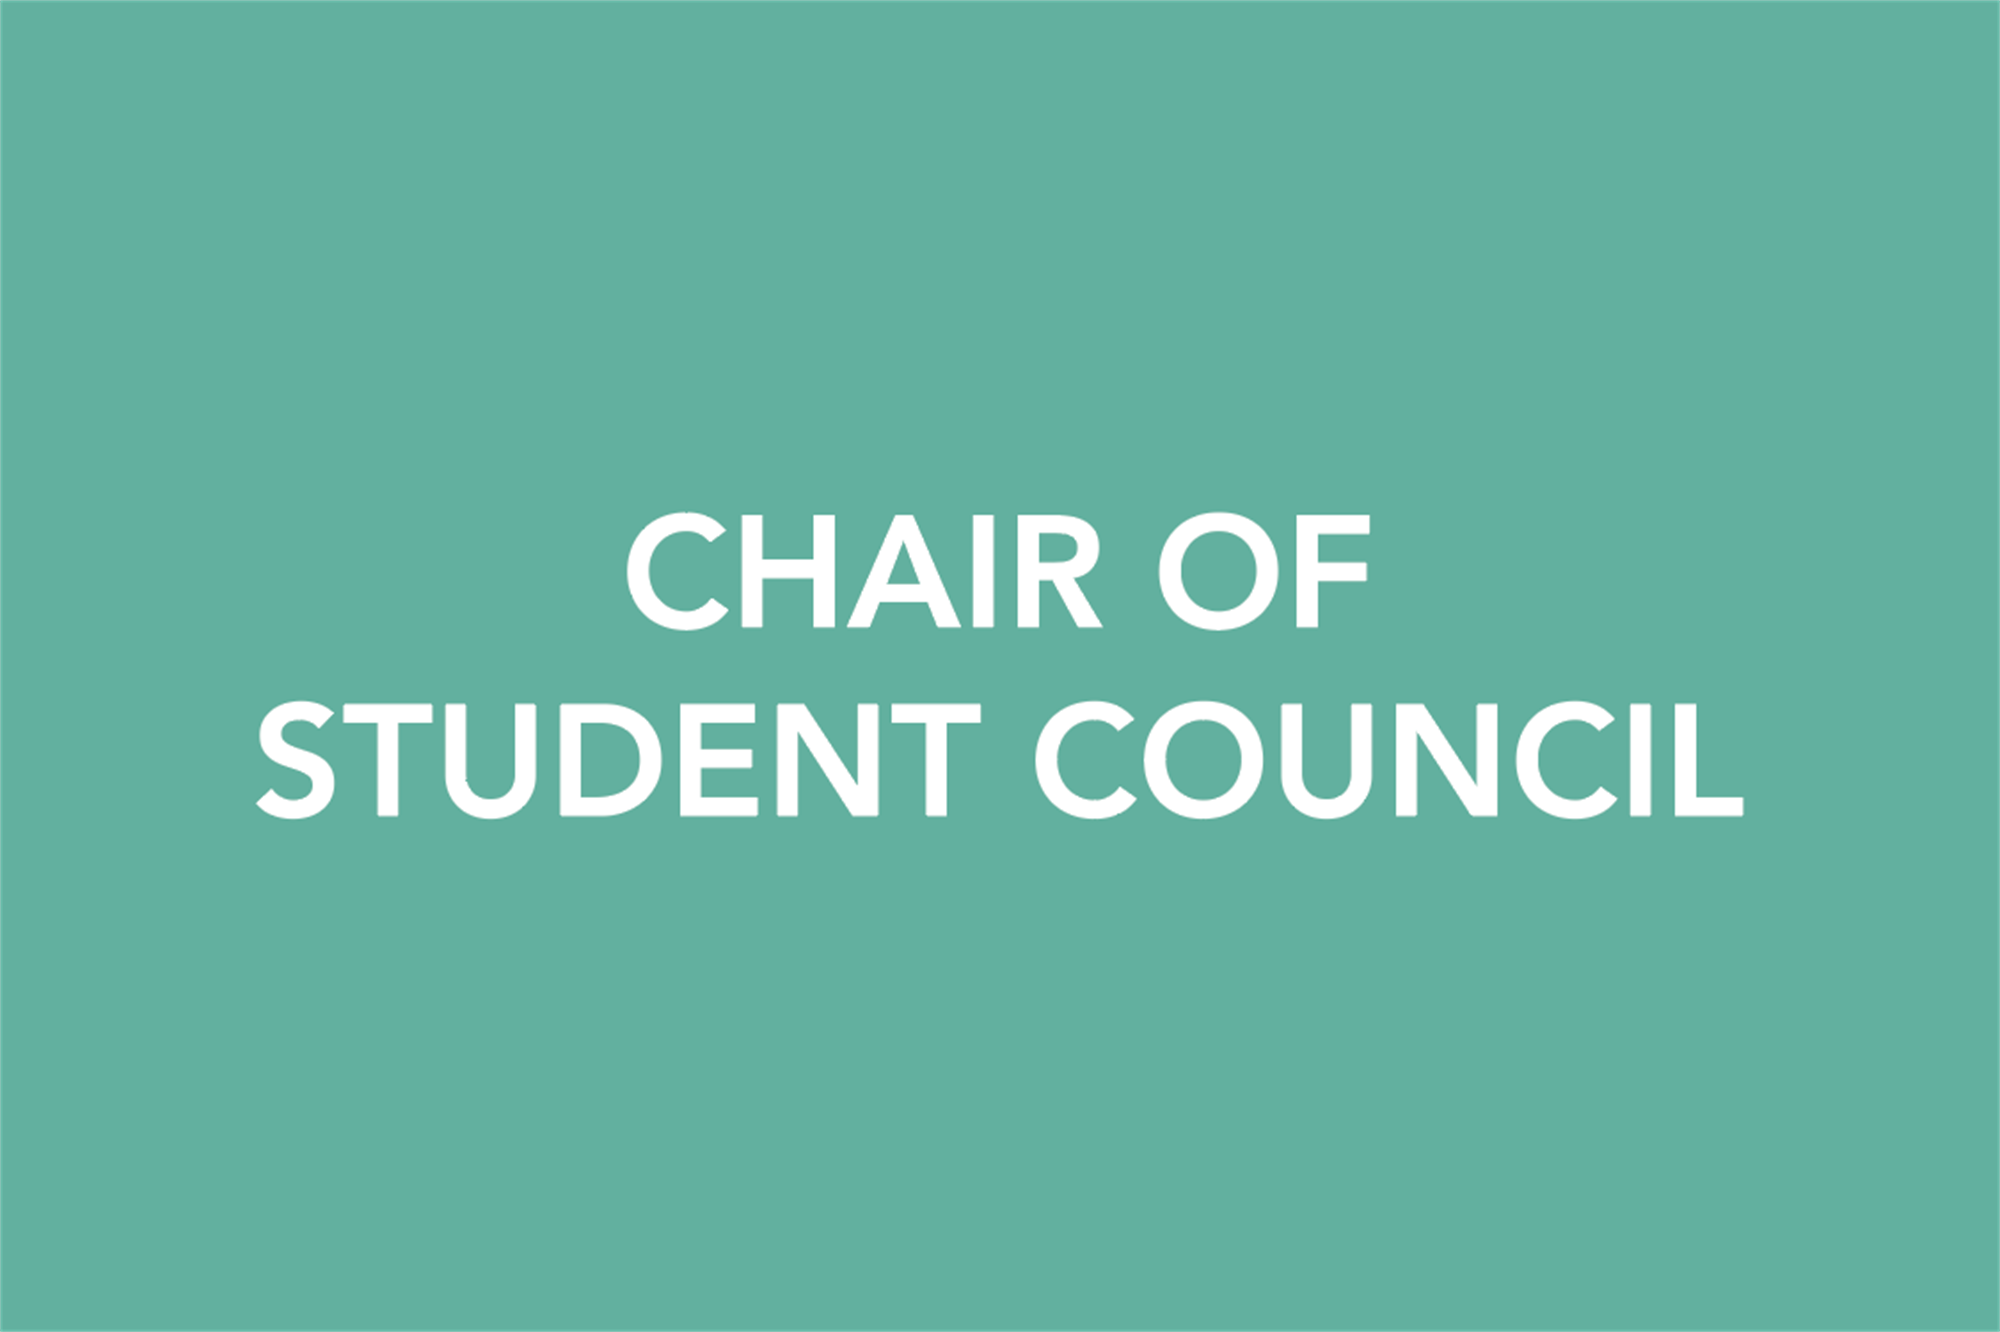 Chair of student council